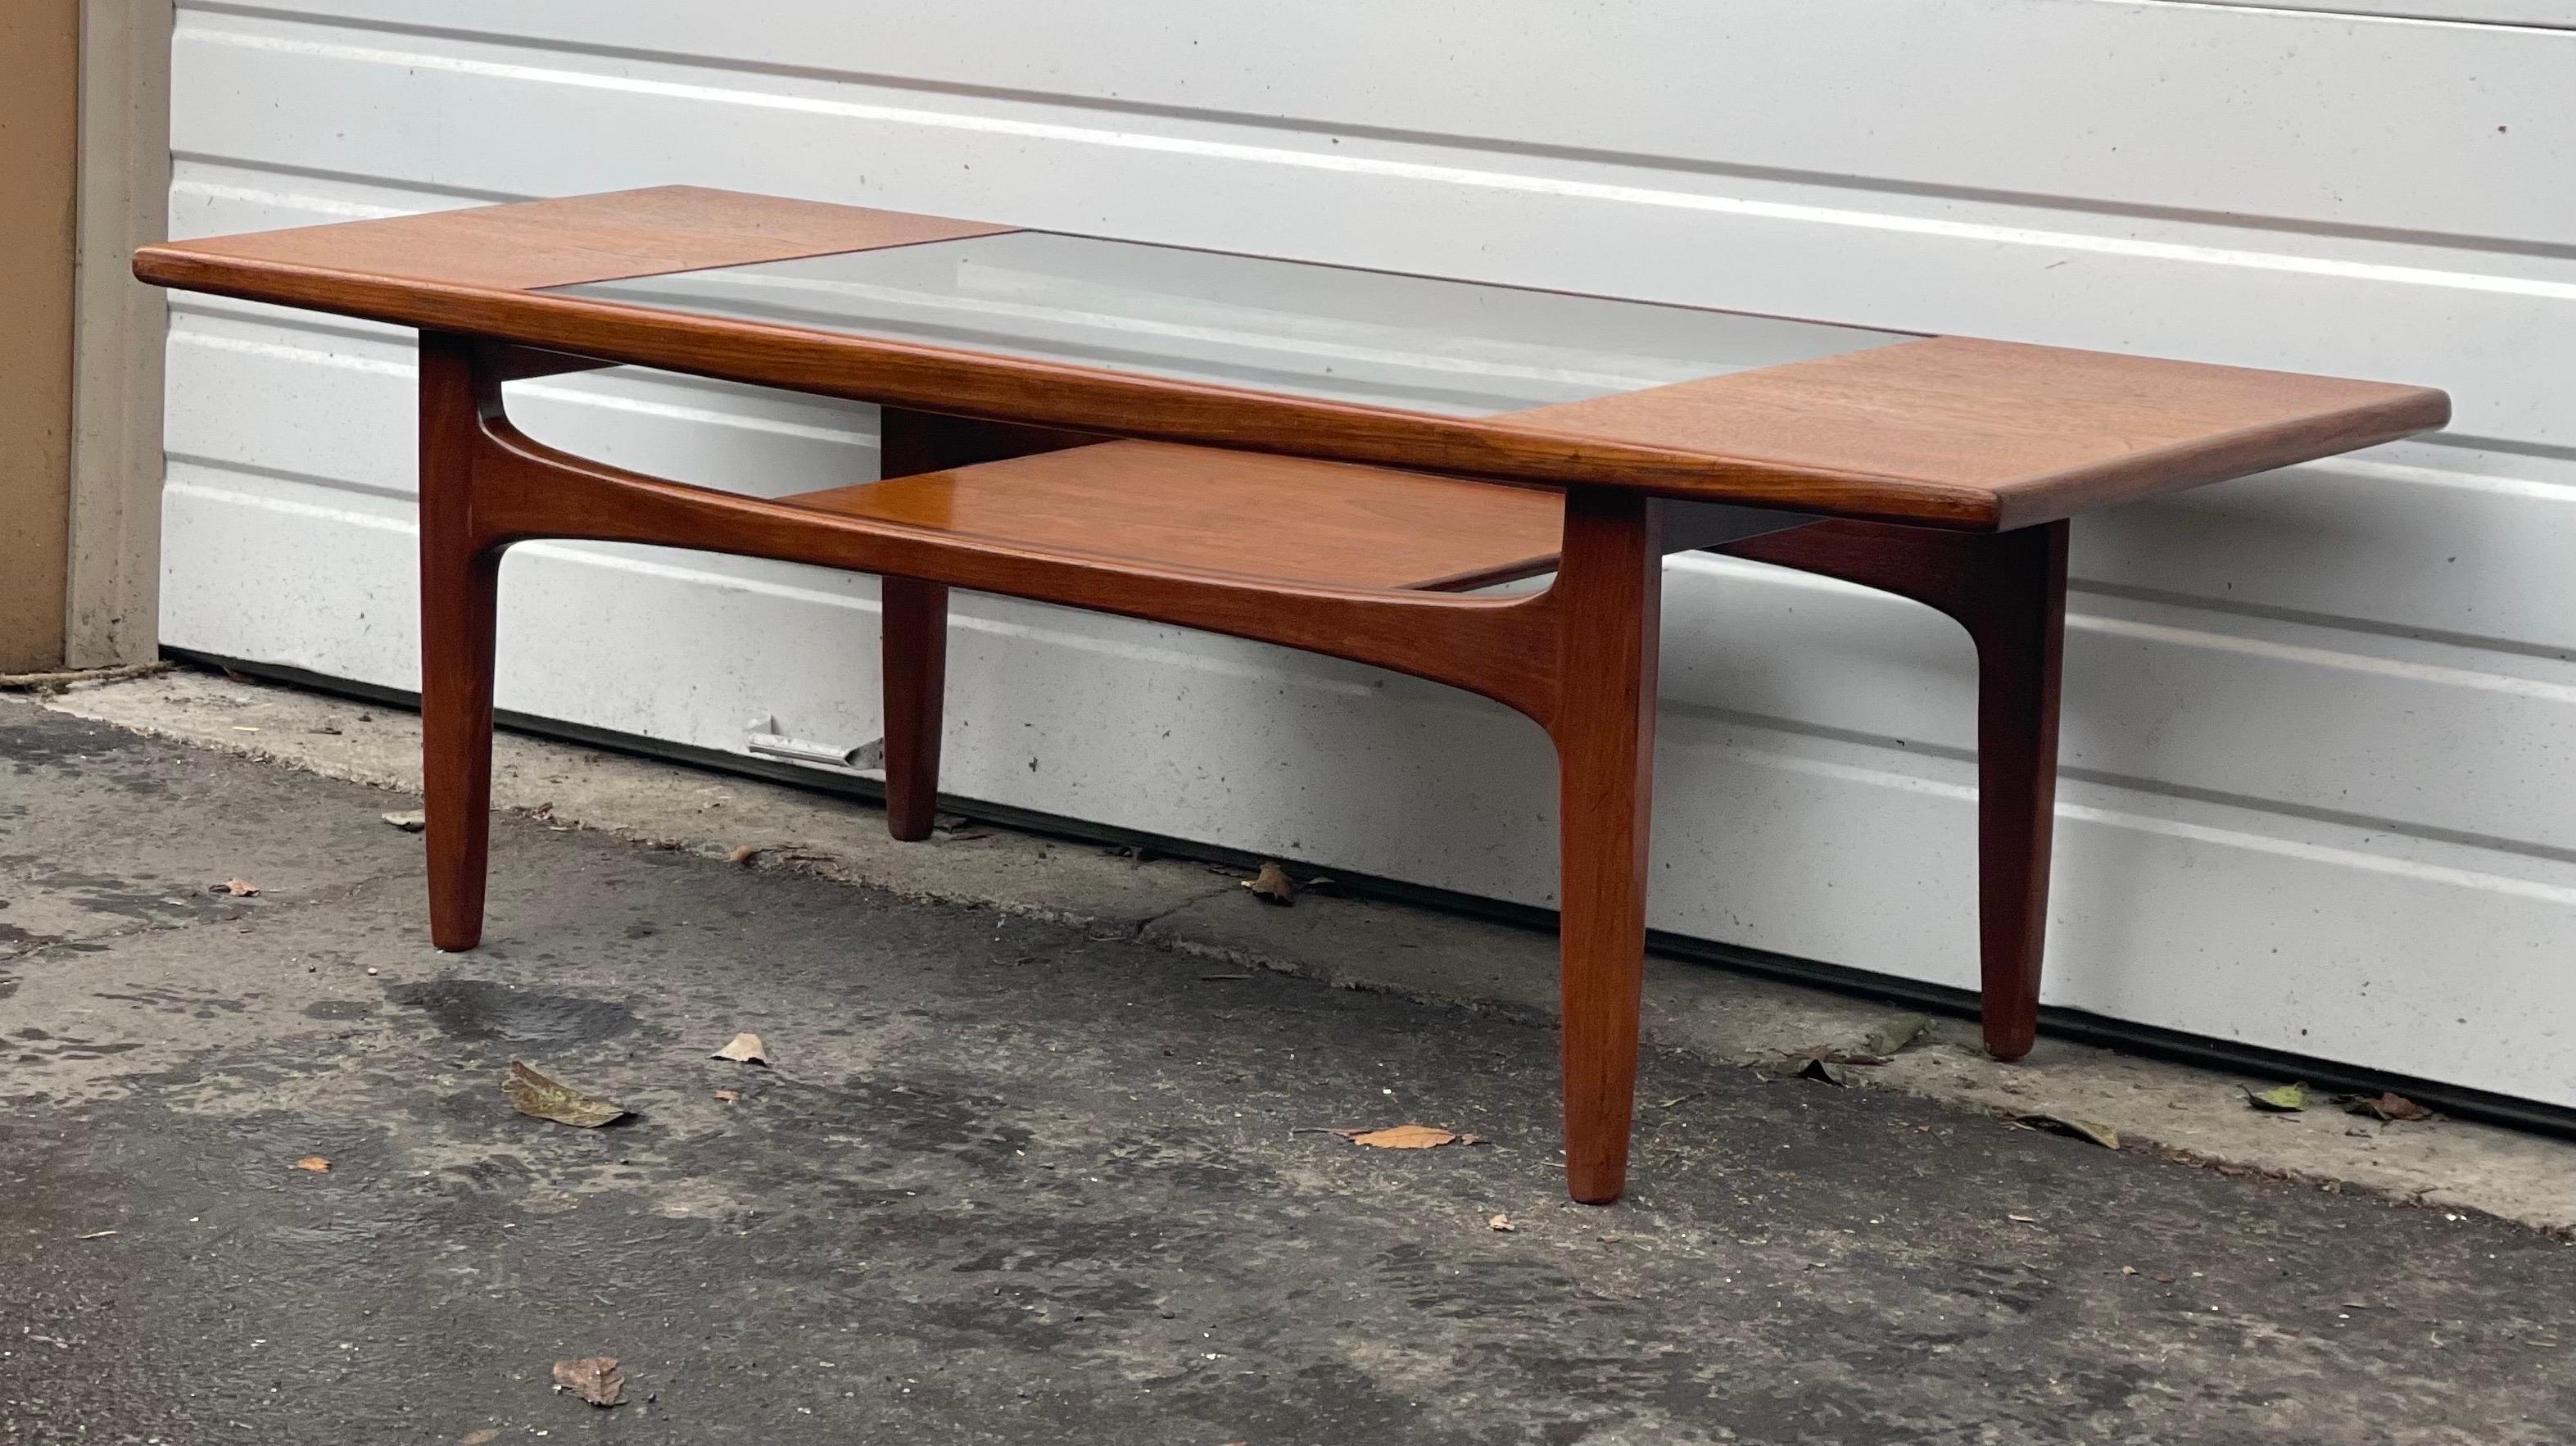 Vintage Mid Century Modern G-Plan Table Stand UK Import

Dimensions. 54 W ; 20 D ; 17 H

( online purchase only)